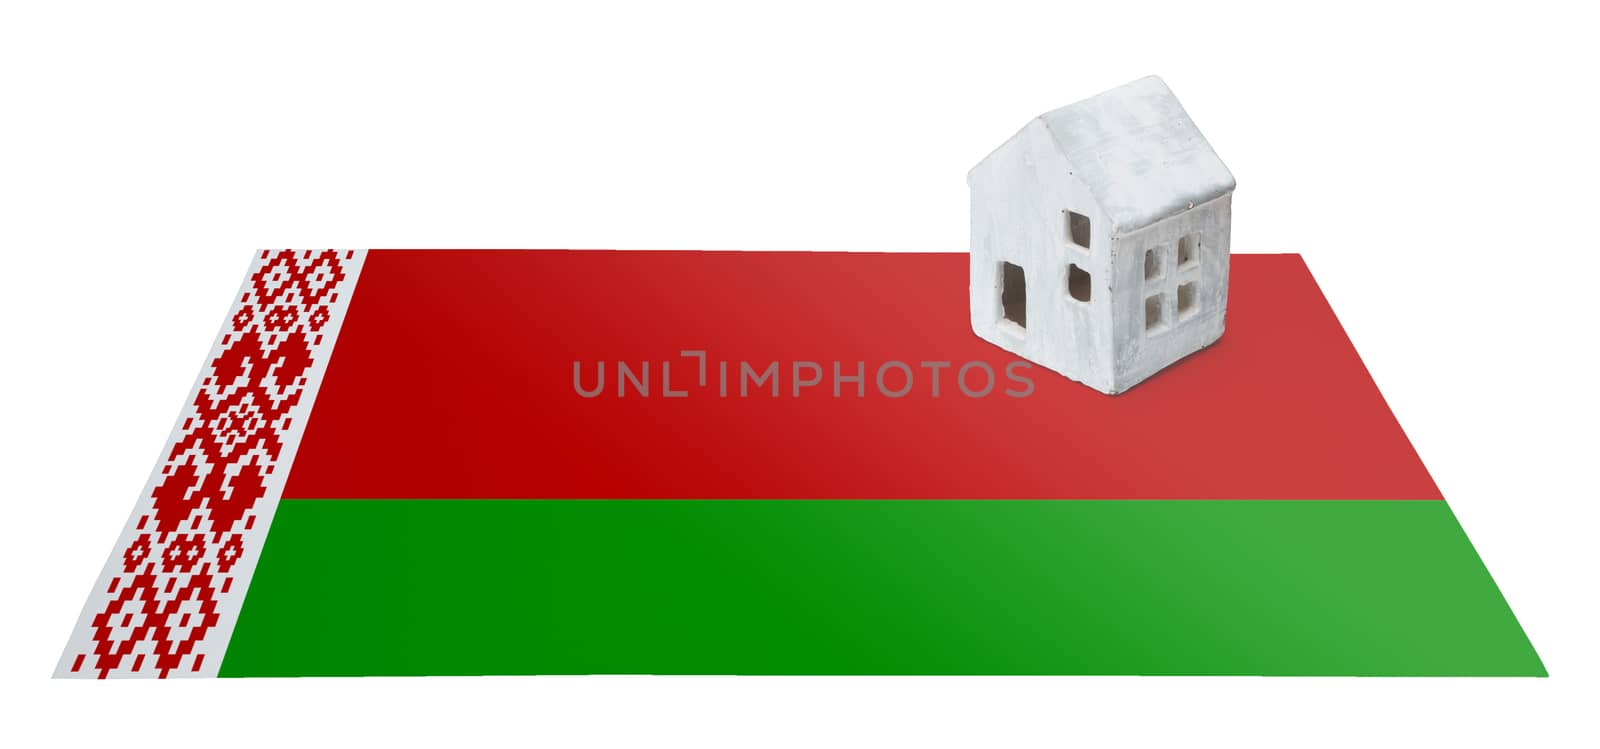 Small house on a flag - Belarus by michaklootwijk